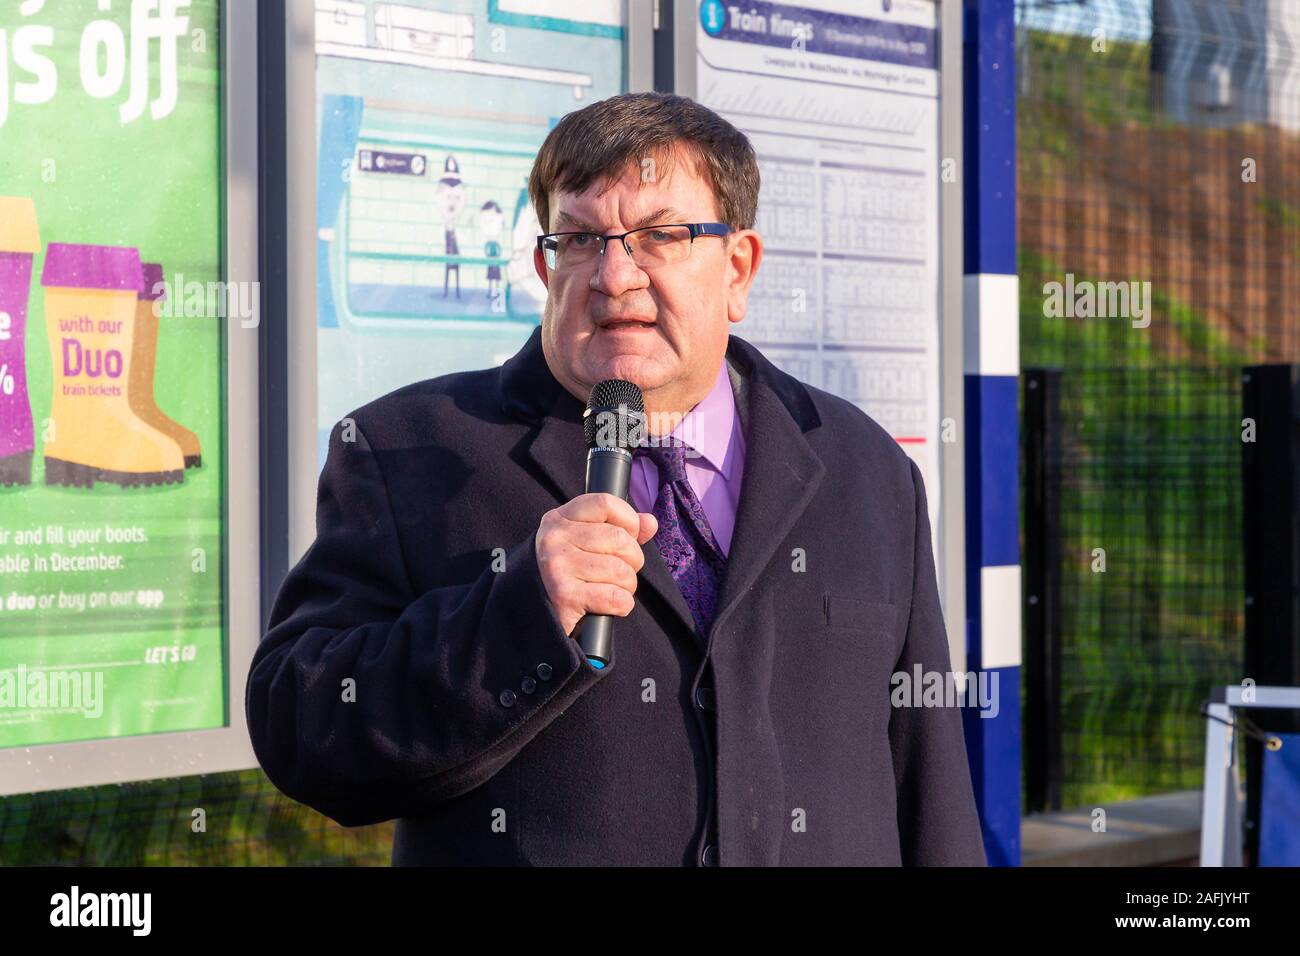 Warrington, Cheshire, UK. 16th Dec, 2019. Professor Steven Broomhead, Chief Executive of Warrington Borough Council addresses the guests at the official opening of Warrington West Railway Station on 16 December 2019 Credit: John Hopkins/Alamy Live News Stock Photo